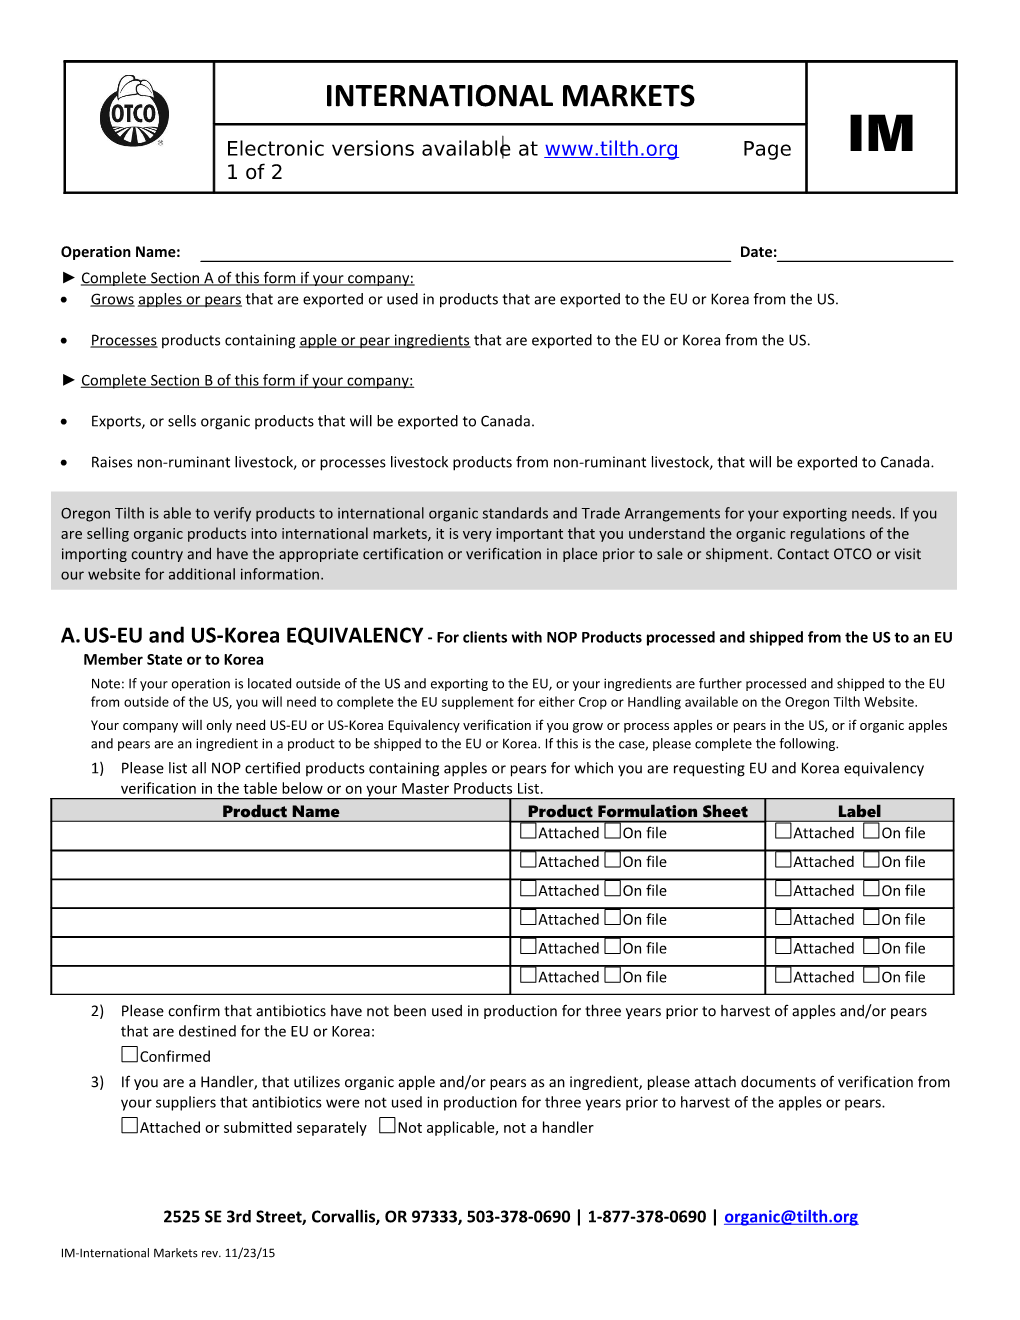 Complete Section a of This Form If Your Company